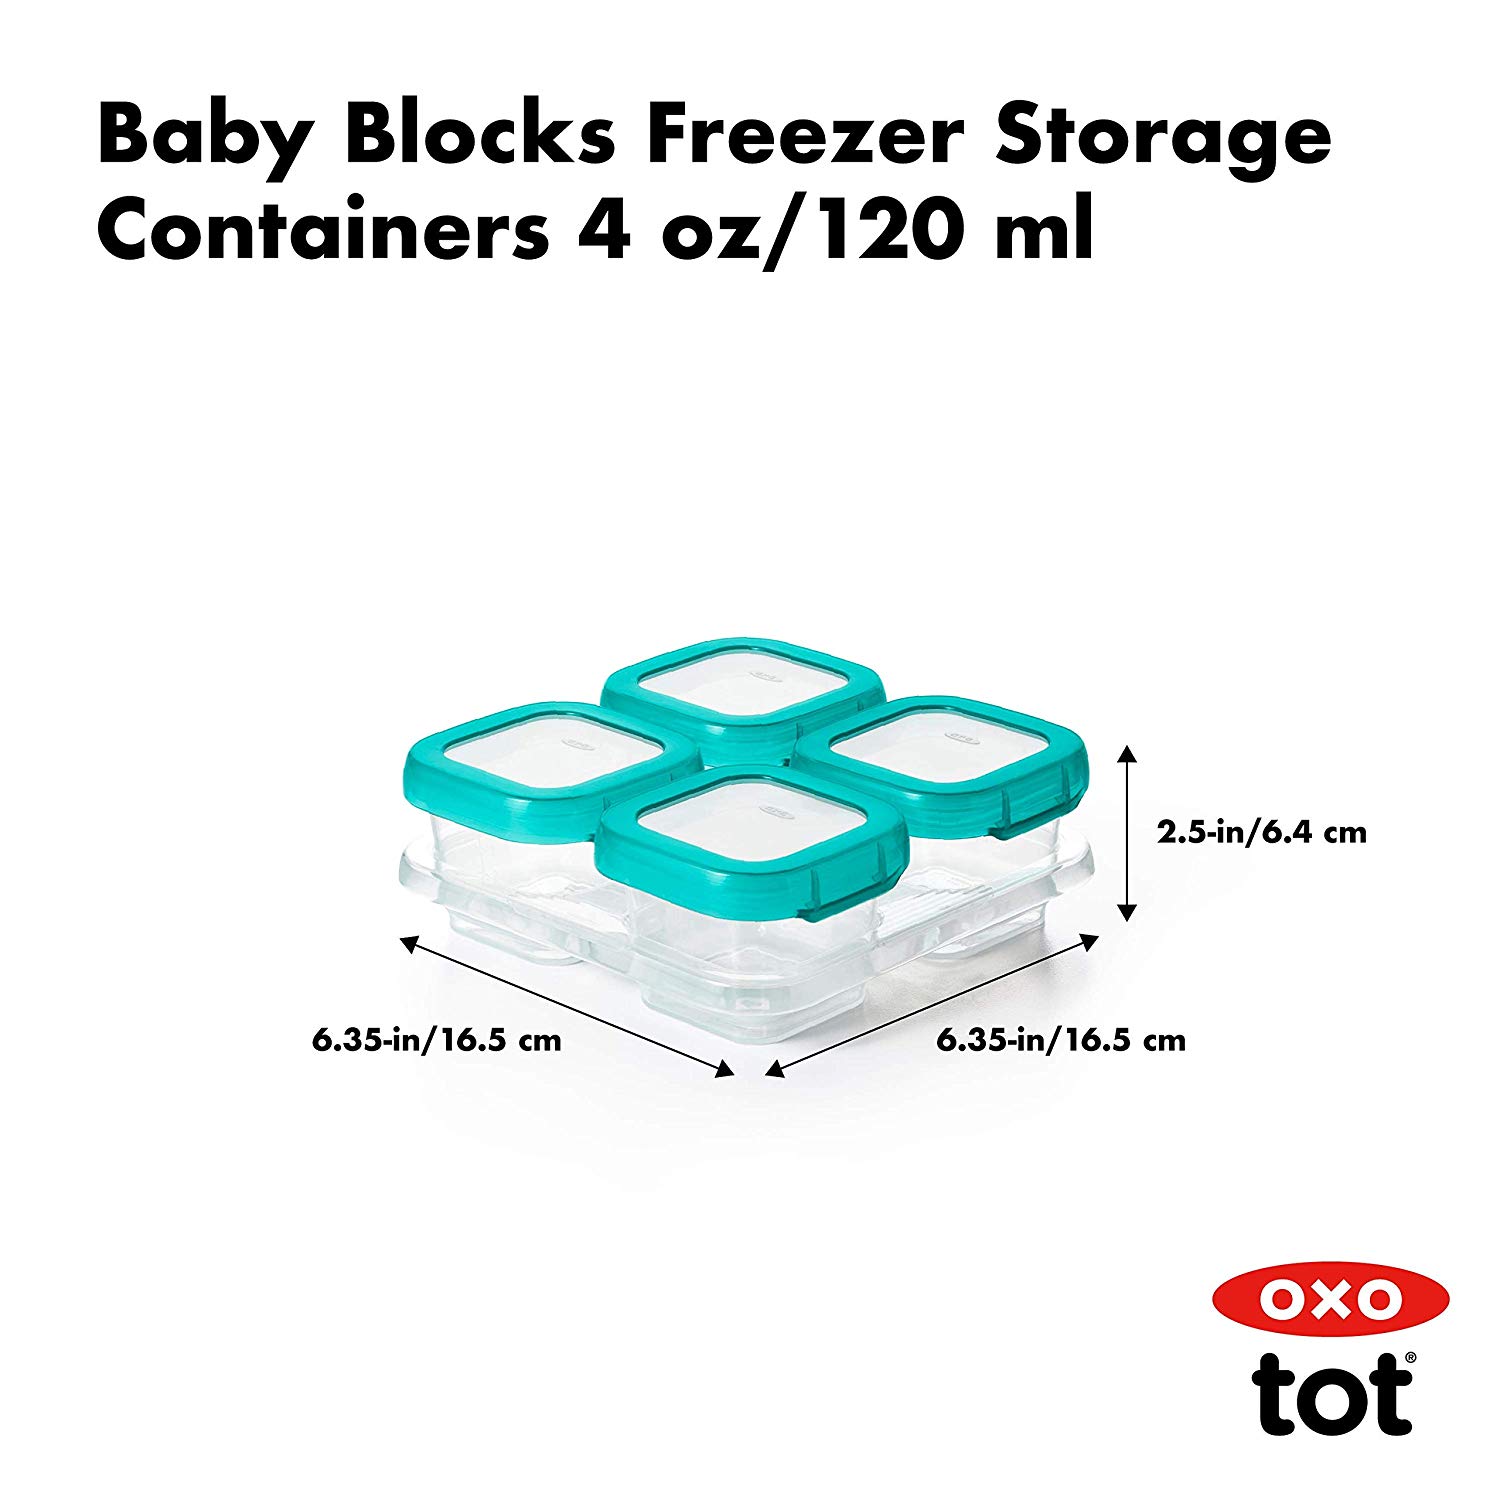 https://oxototph.com/wp-content/uploads/2020/03/OXO-Tot-Baby-Blocks-Freezer-Storage-Container-4Oz-Teal-Image04.jpg